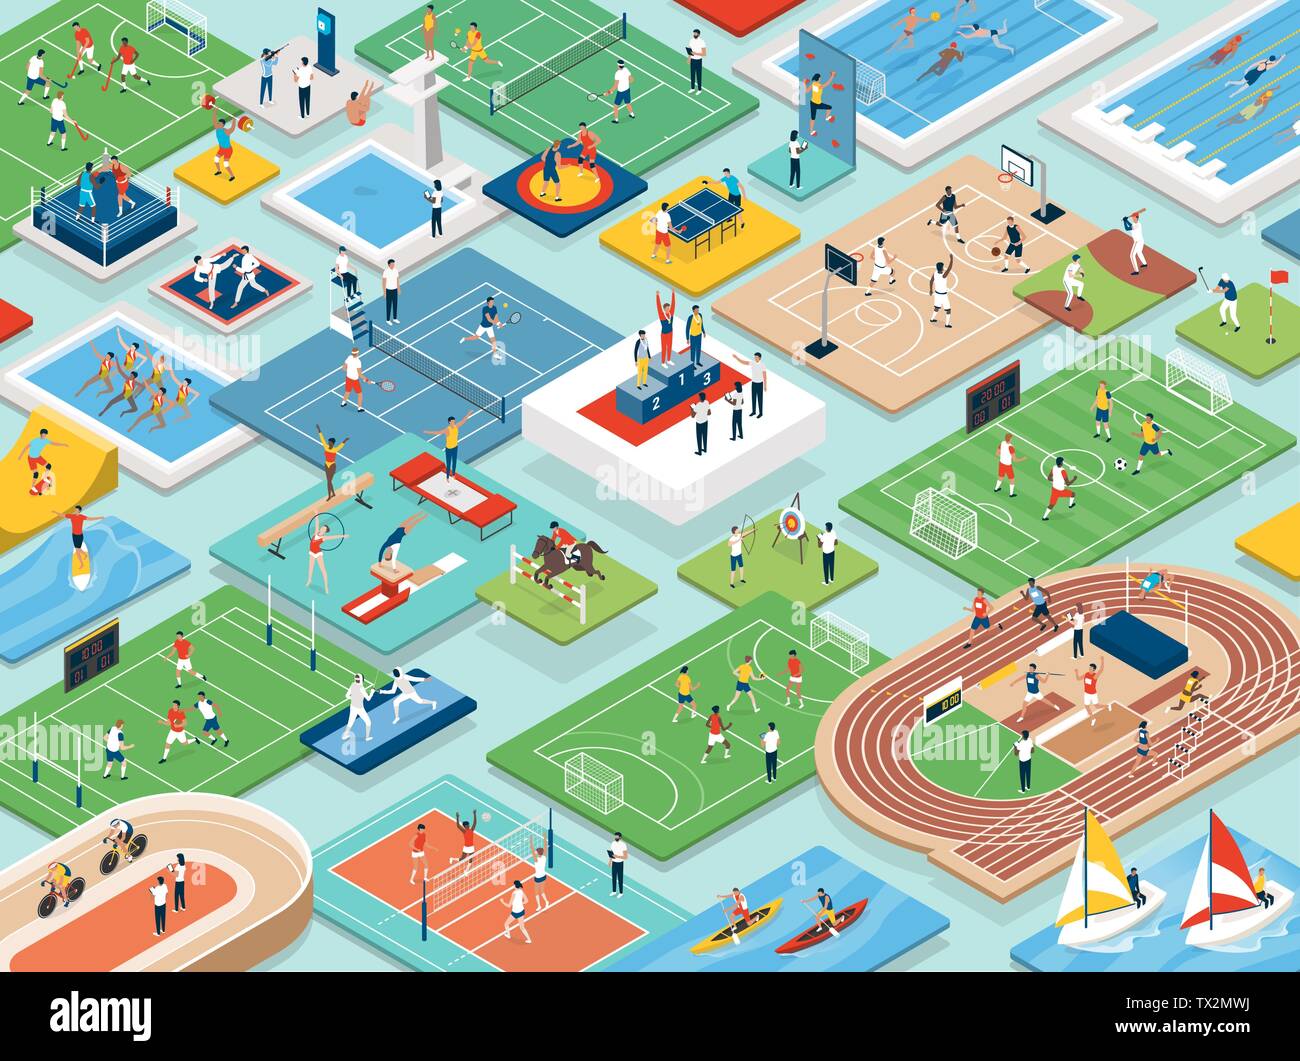 Sports and international competitions: multiethnic professional athletes and teams performing together, isometric people, fields and equipment Stock Vector